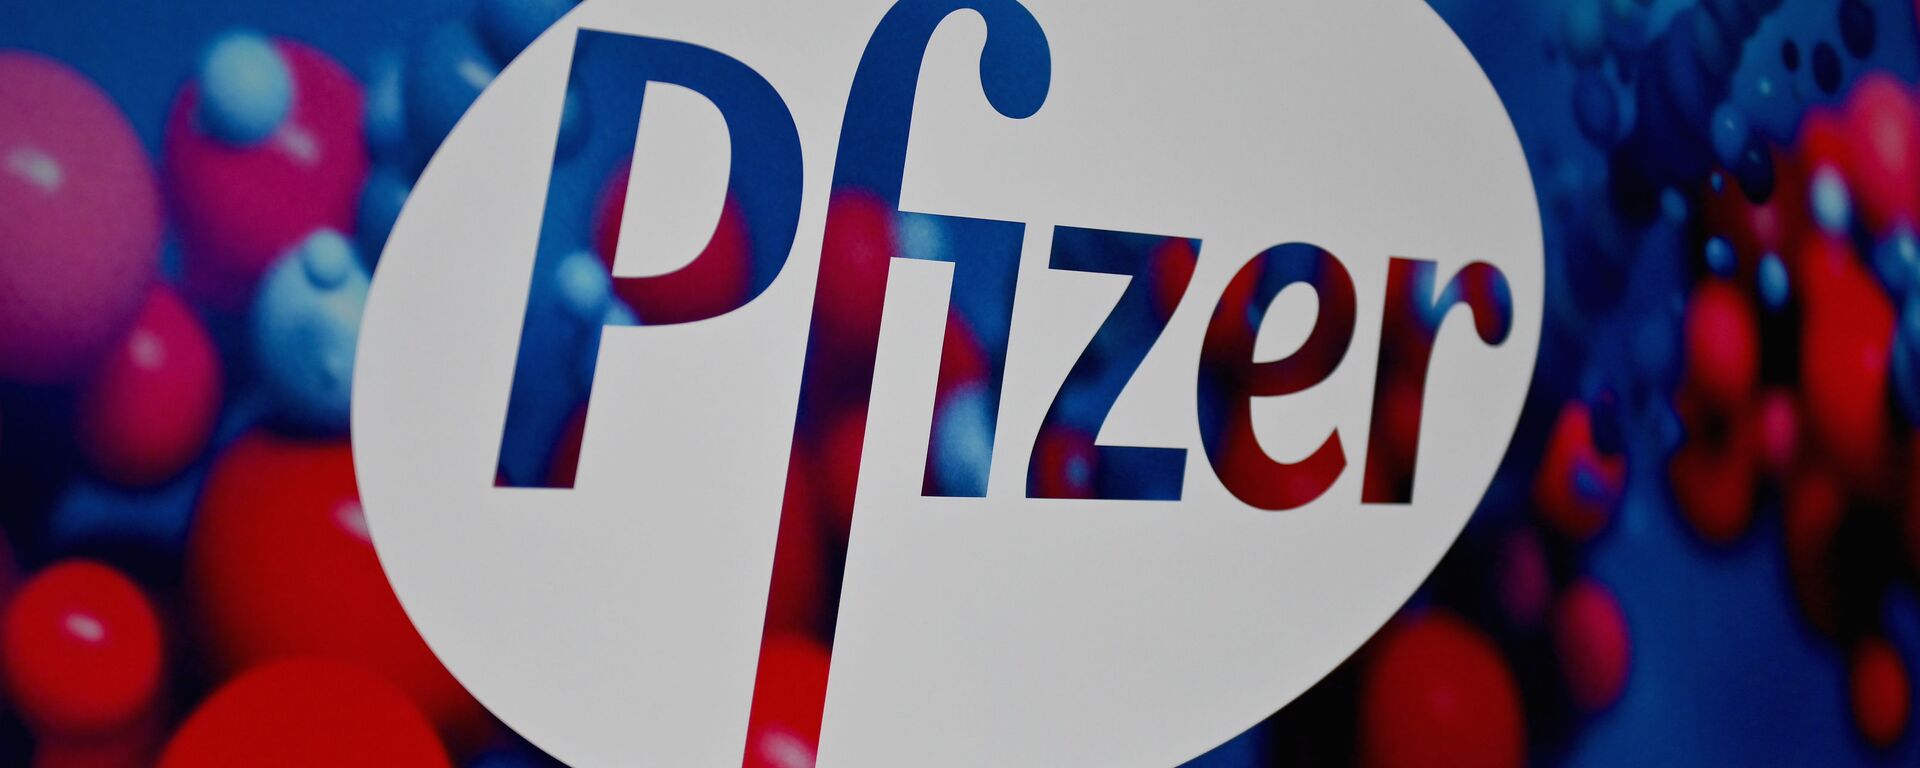 The Pfizer logo is seen at the Pfizer Inc. headquarters on 9 December 2020 in New York City, NY, US. - Sputnik International, 1920, 20.01.2021